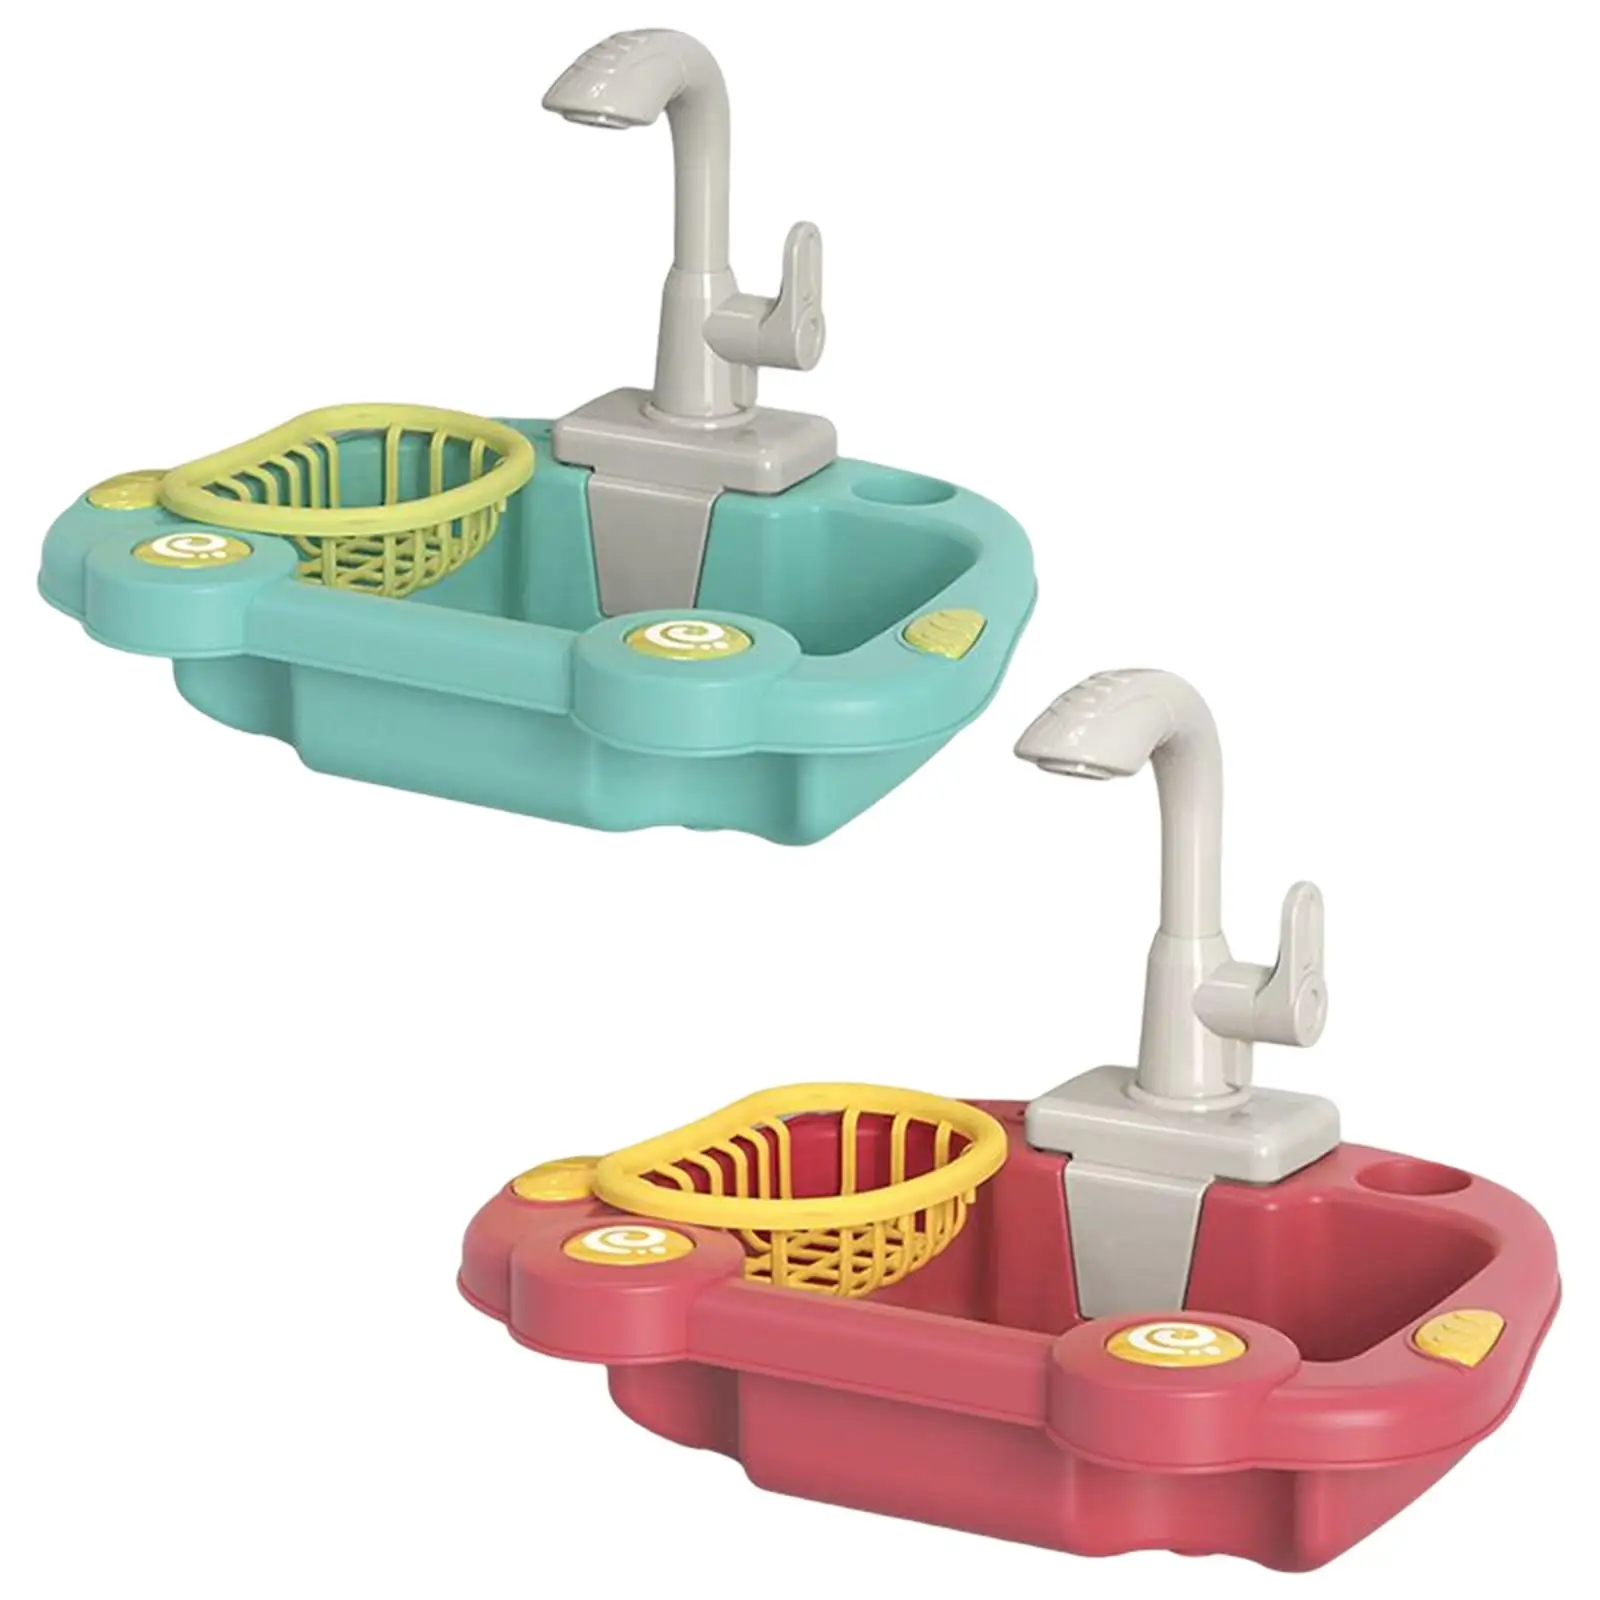 Kitchen Sink Toy Running Water Dishes Electric Faucet Play Set Pans 7L Child